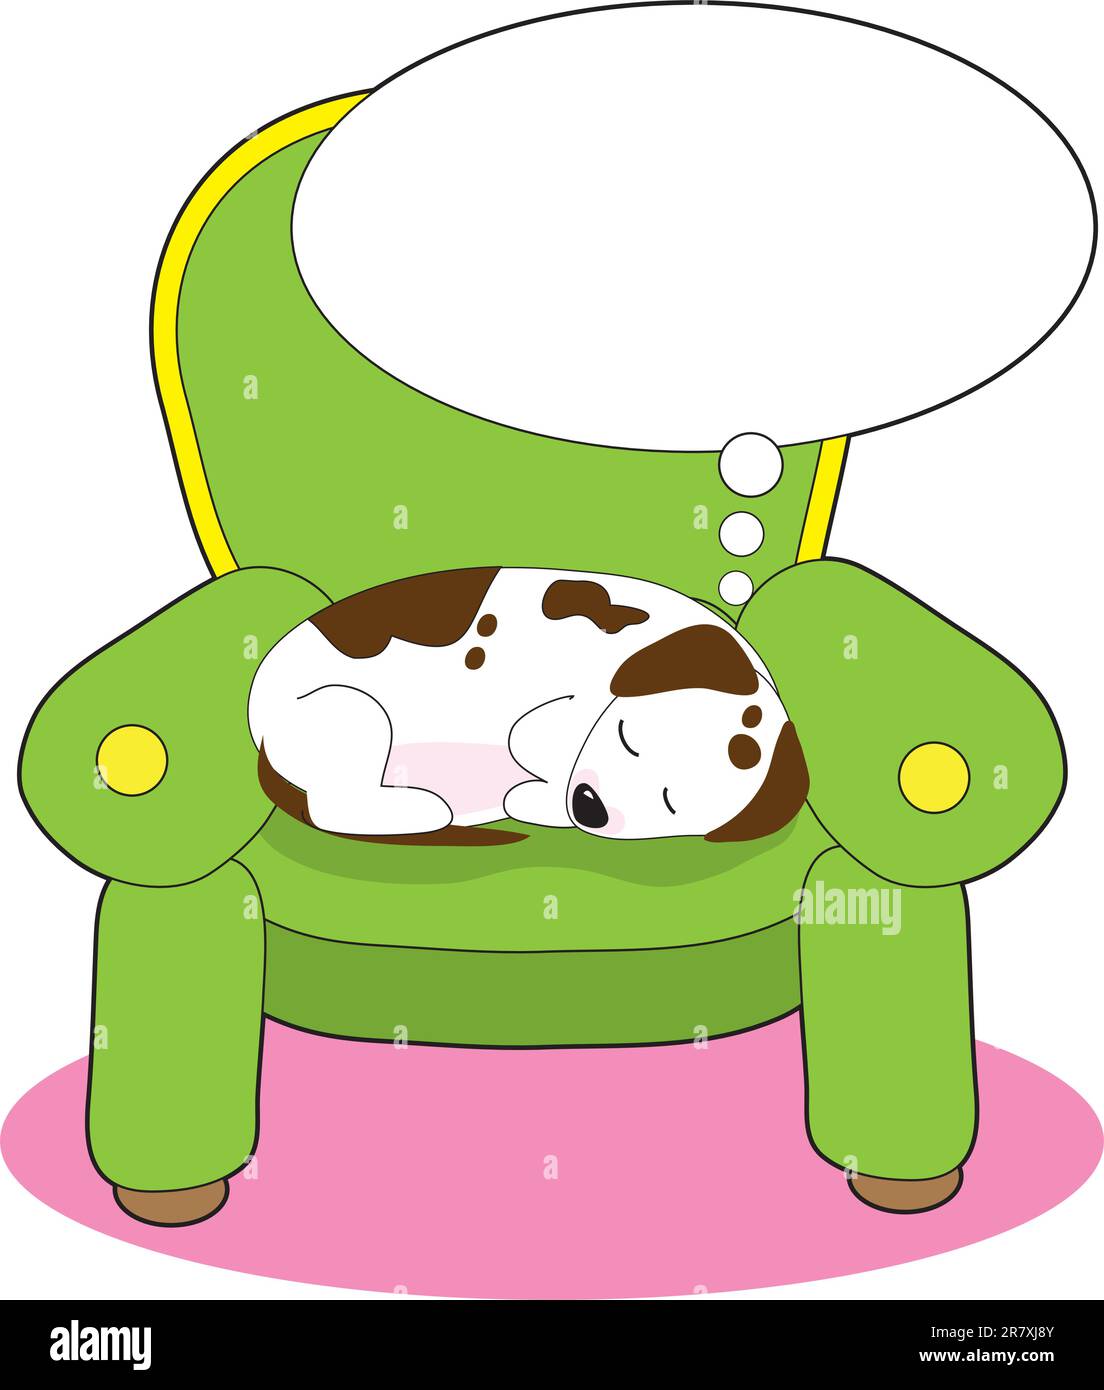 A contented dog is having a dream, while asleep on a green easy chair. Stock Vector